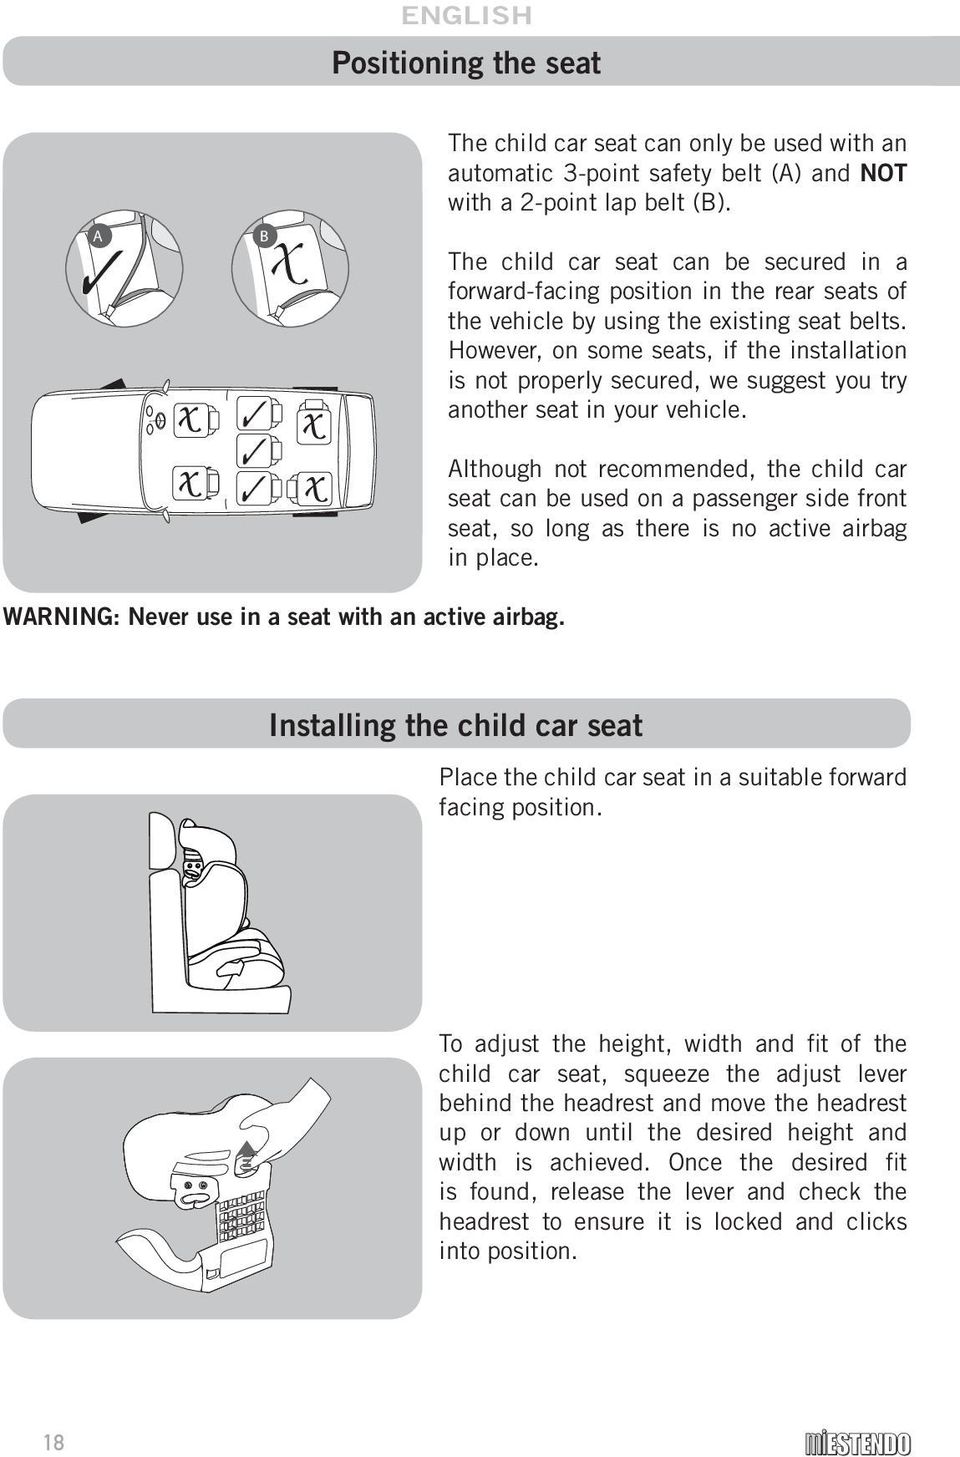 However, on some seats, if the installation is not properly secured, we suggest you try another seat in your vehicle.